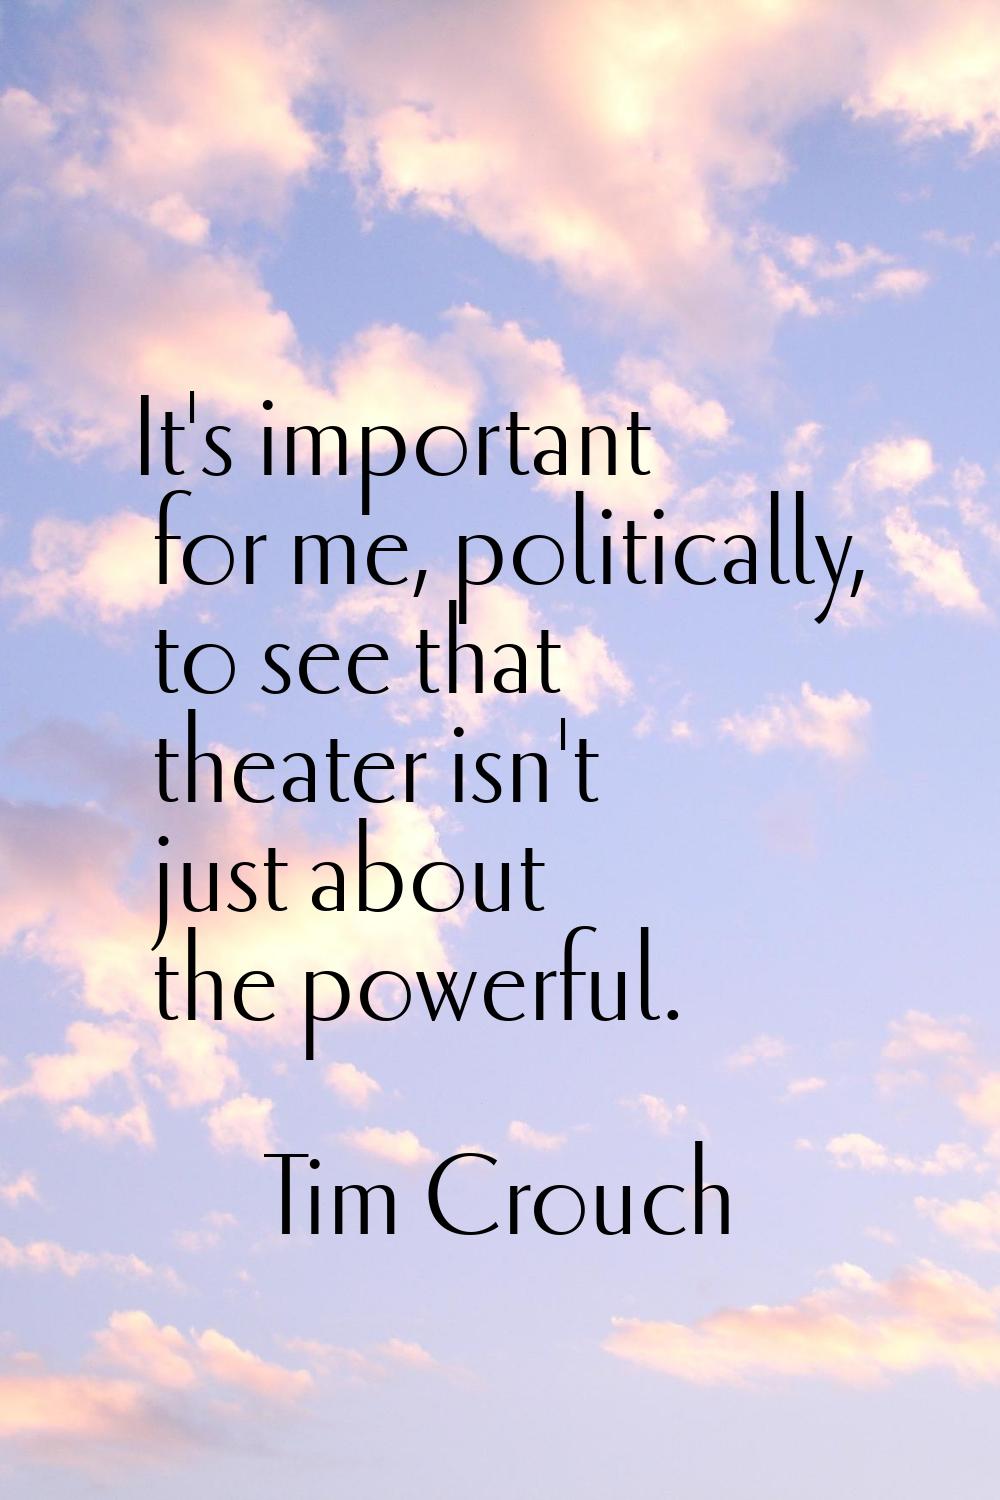 It's important for me, politically, to see that theater isn't just about the powerful.